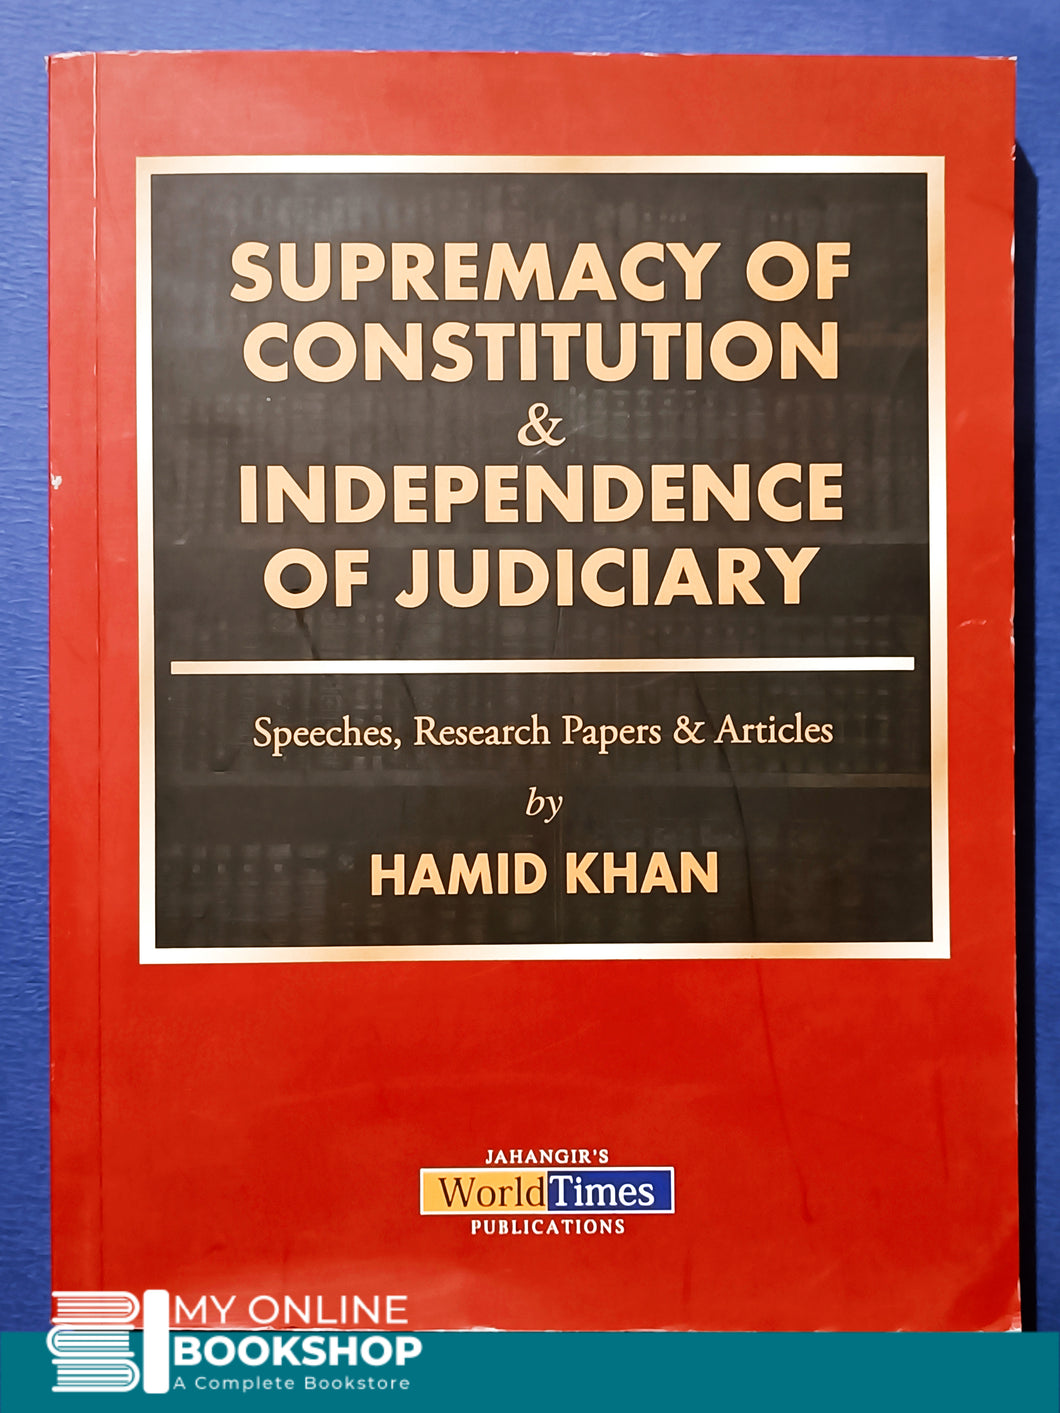 SUPREMACY OF CONSTITUTION& INDEPENDENCE OF JUDICIARY